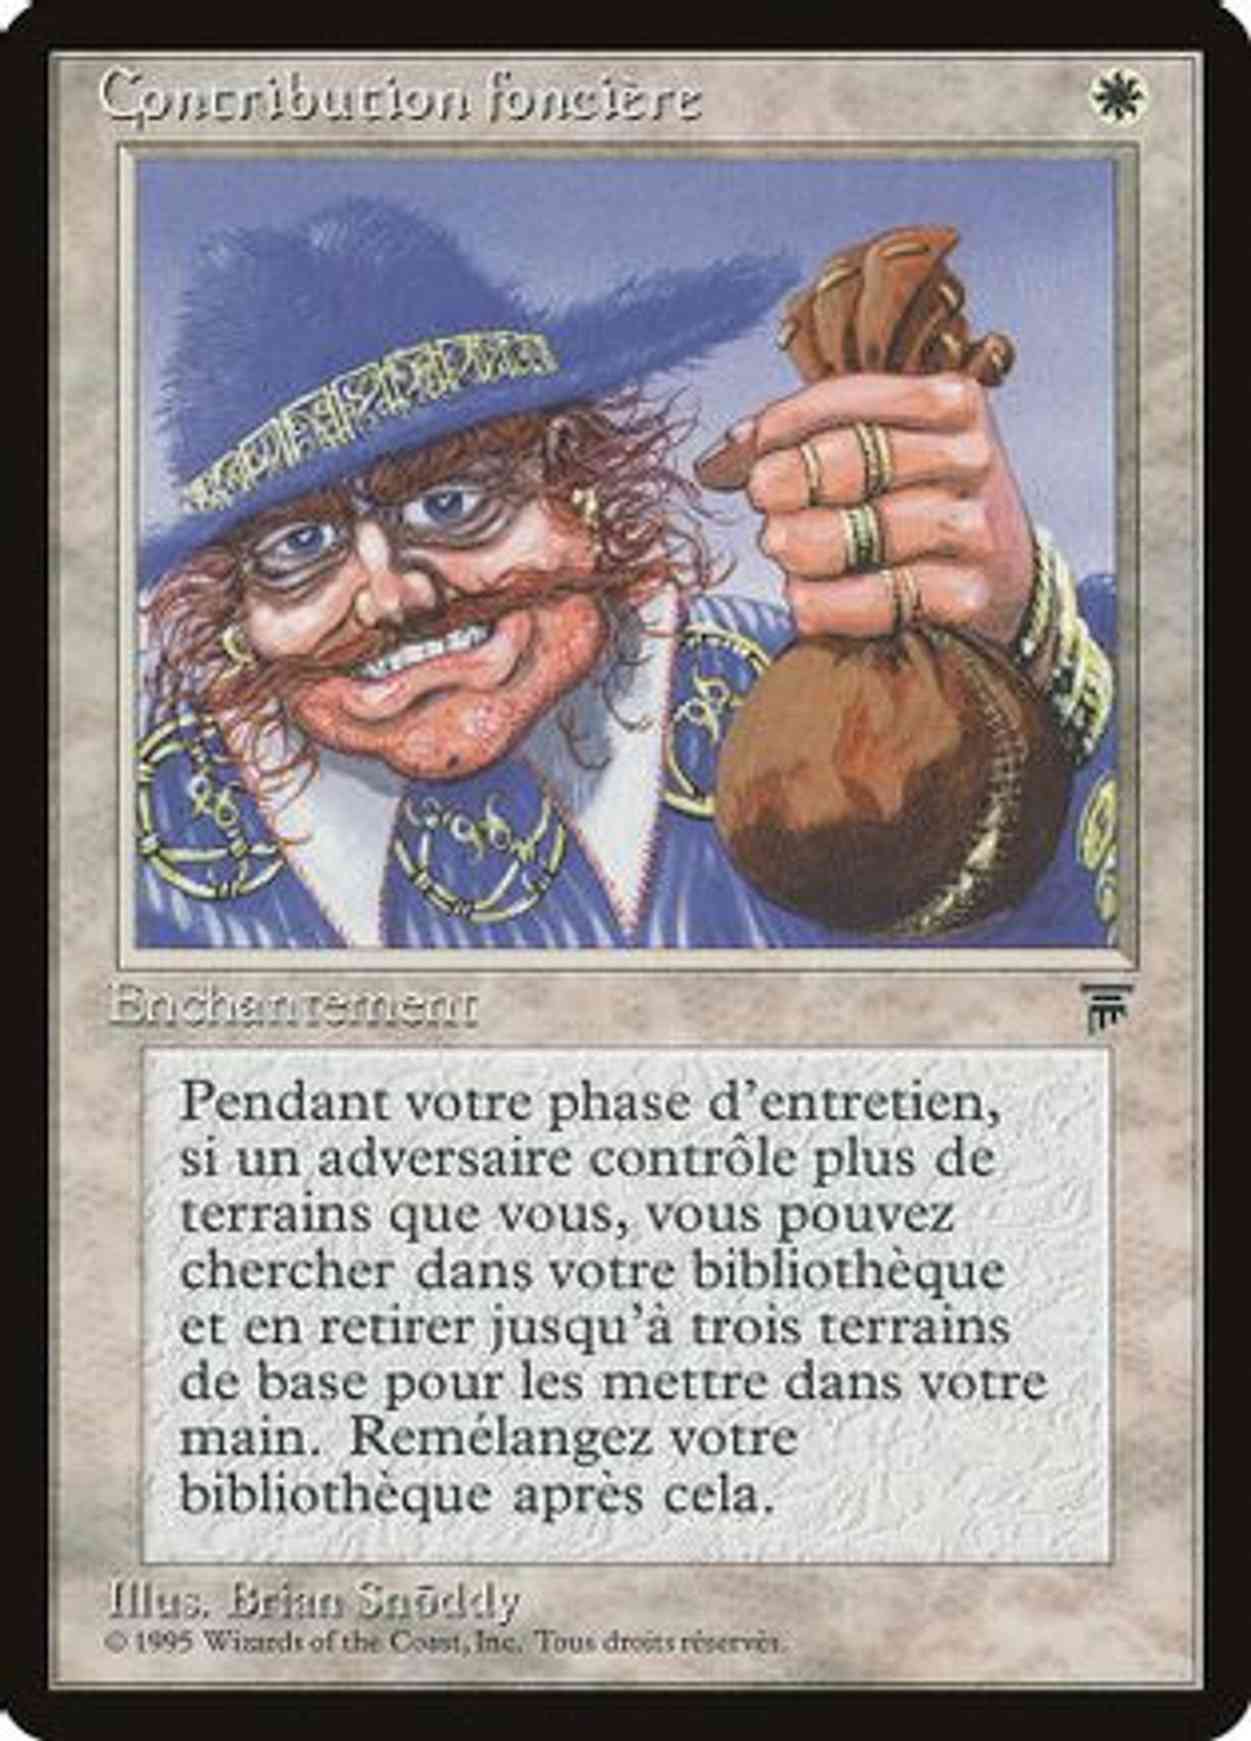 Land Tax (French) - "Contribution fonciere" magic card front